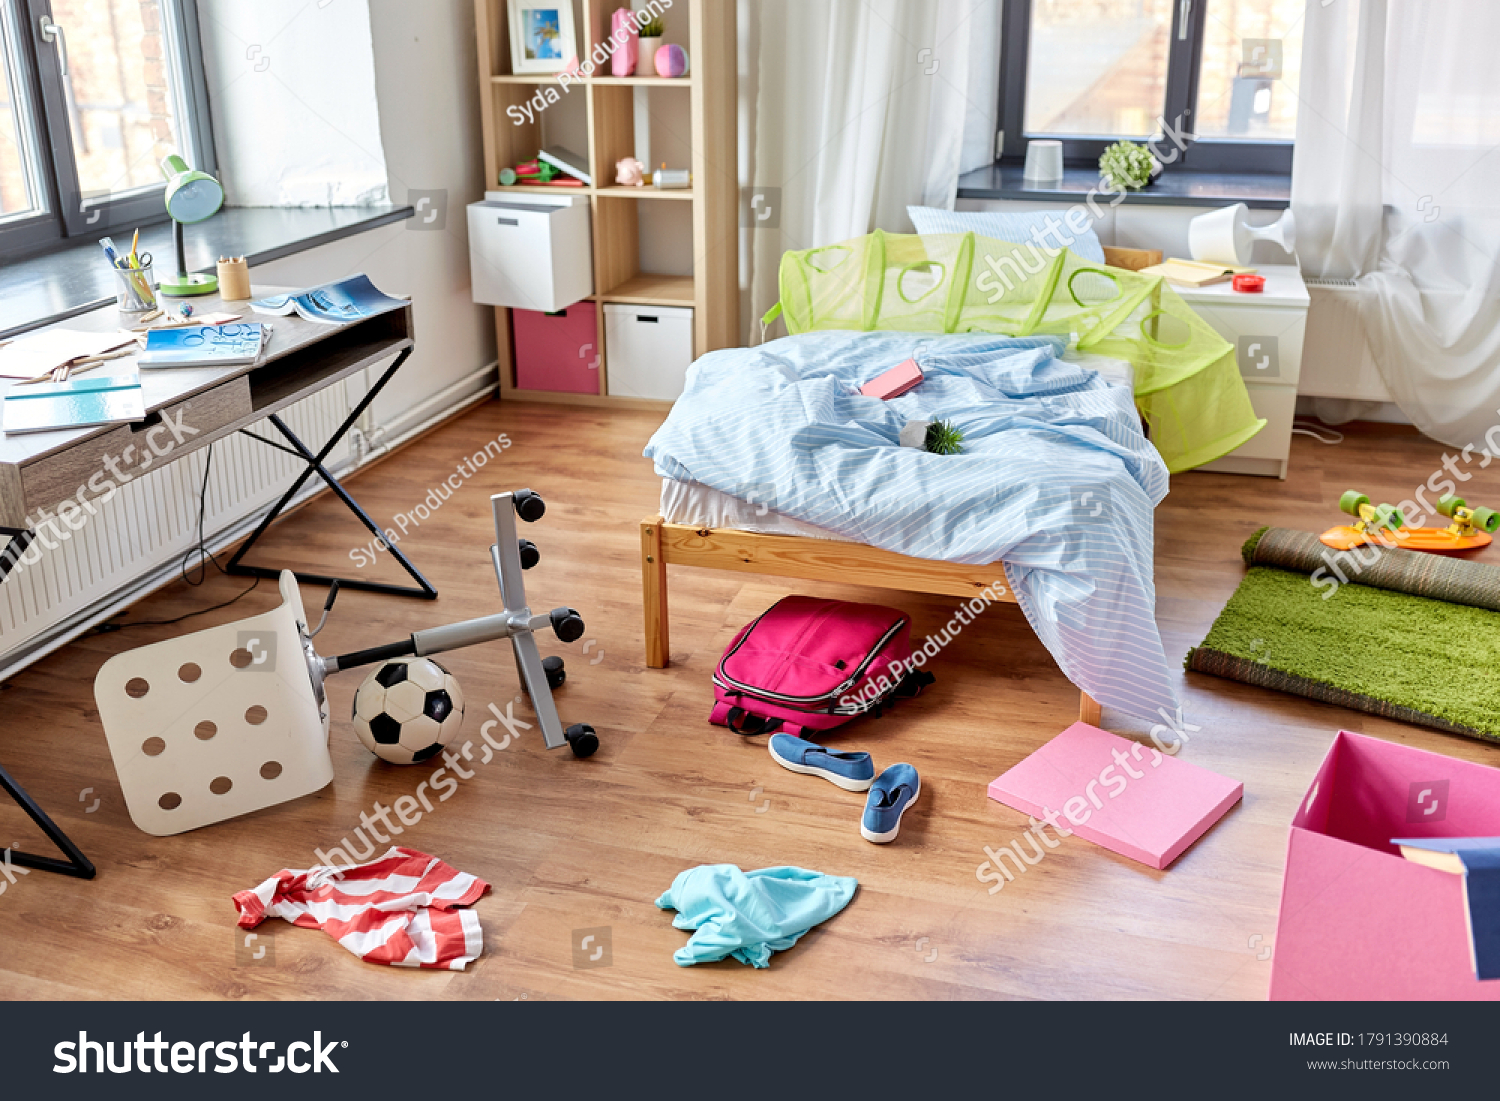 mess, disorder and interior concept - view of messy home kid's room with scattered stuff #1791390884